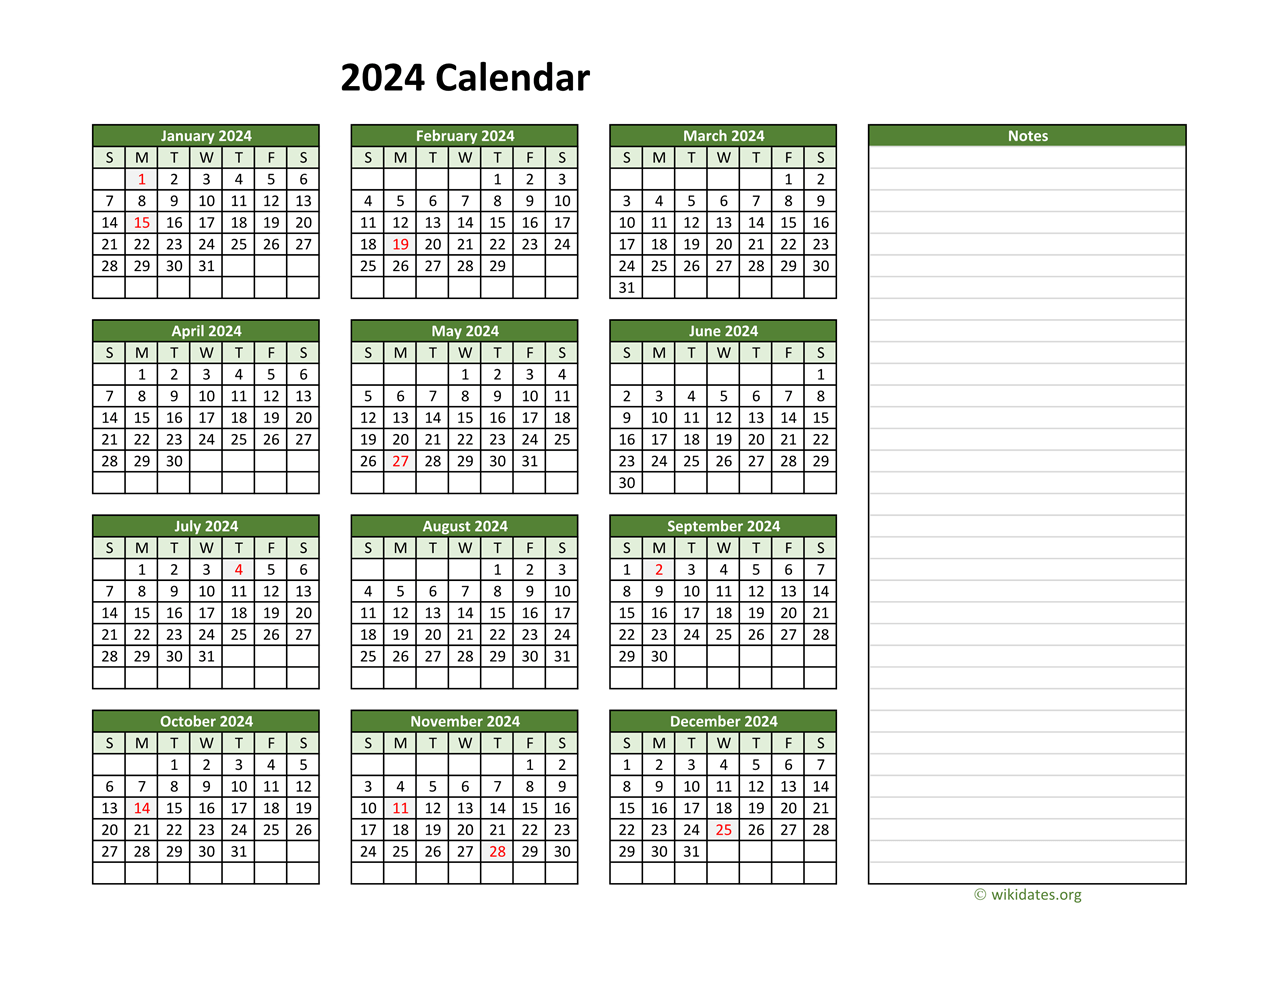 Yearly Printable 2024 Calendar with Notes | WikiDates.org